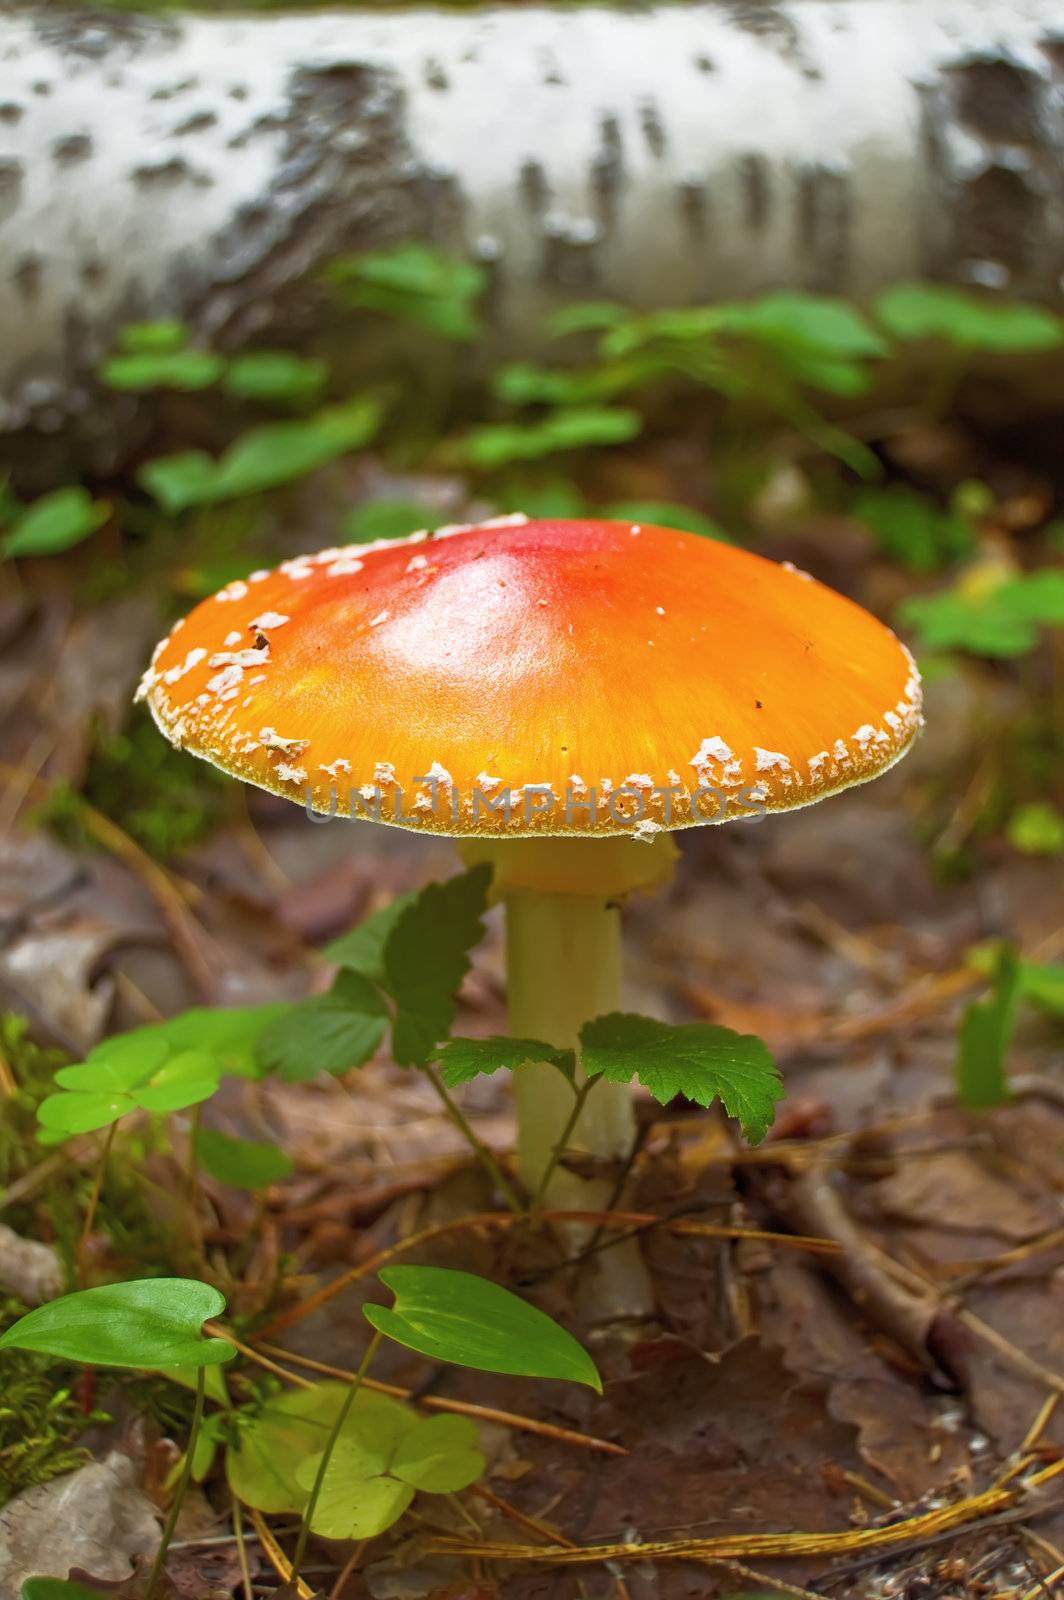 Orange big amanita with white spots on the background of the soil, green leaves and birch trunk